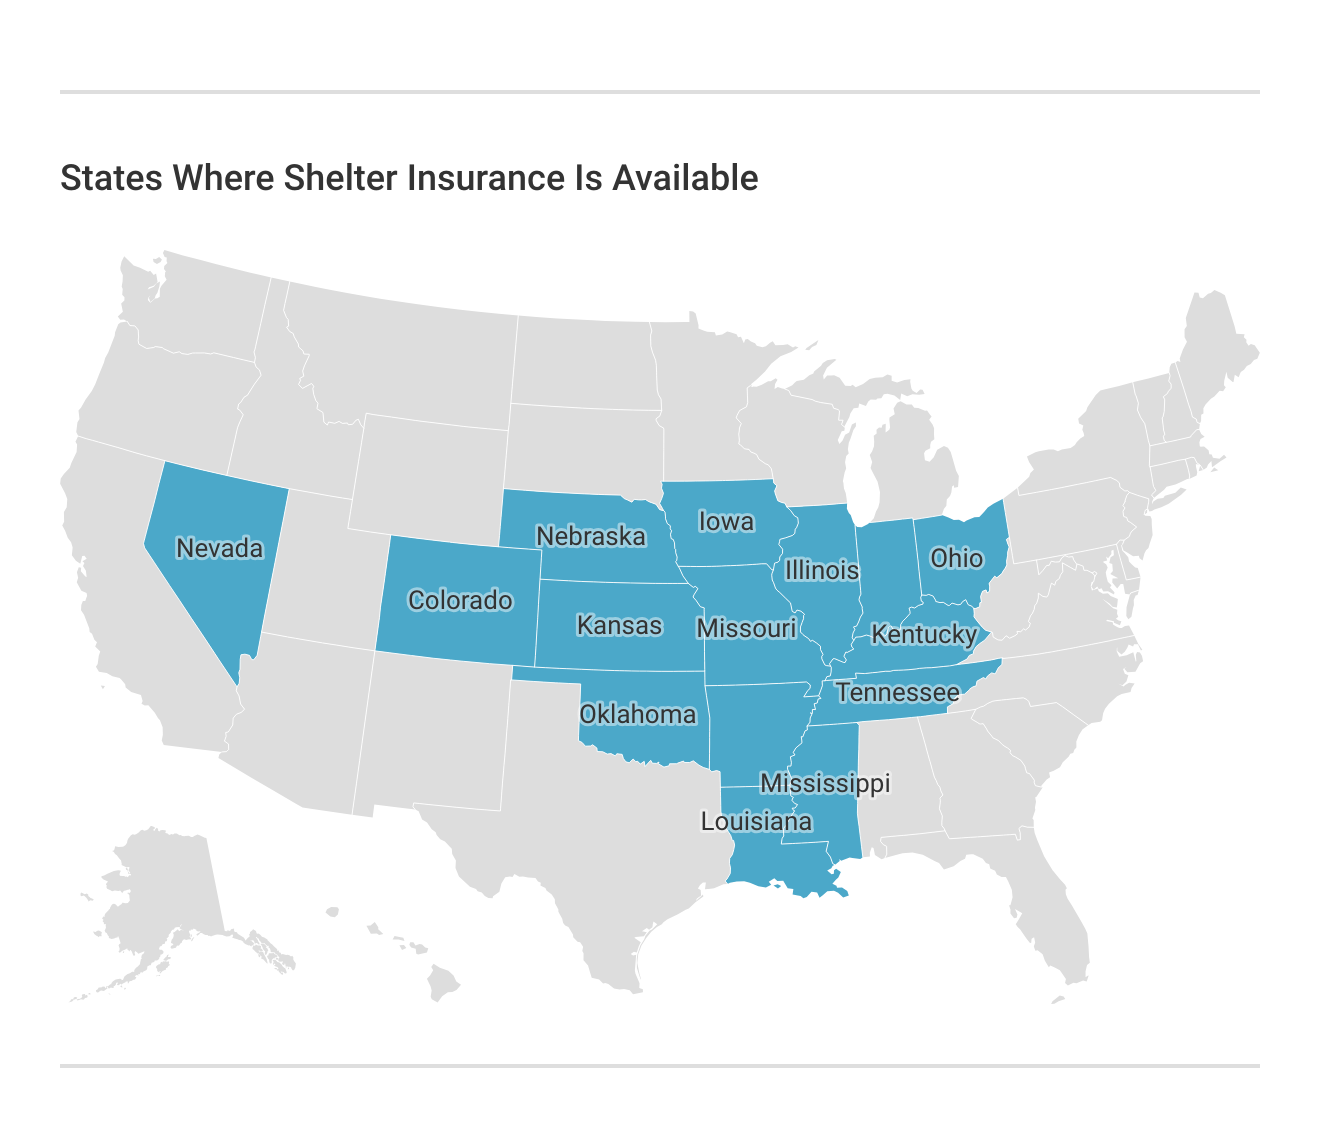 States Where Shelter Insurance Is Available